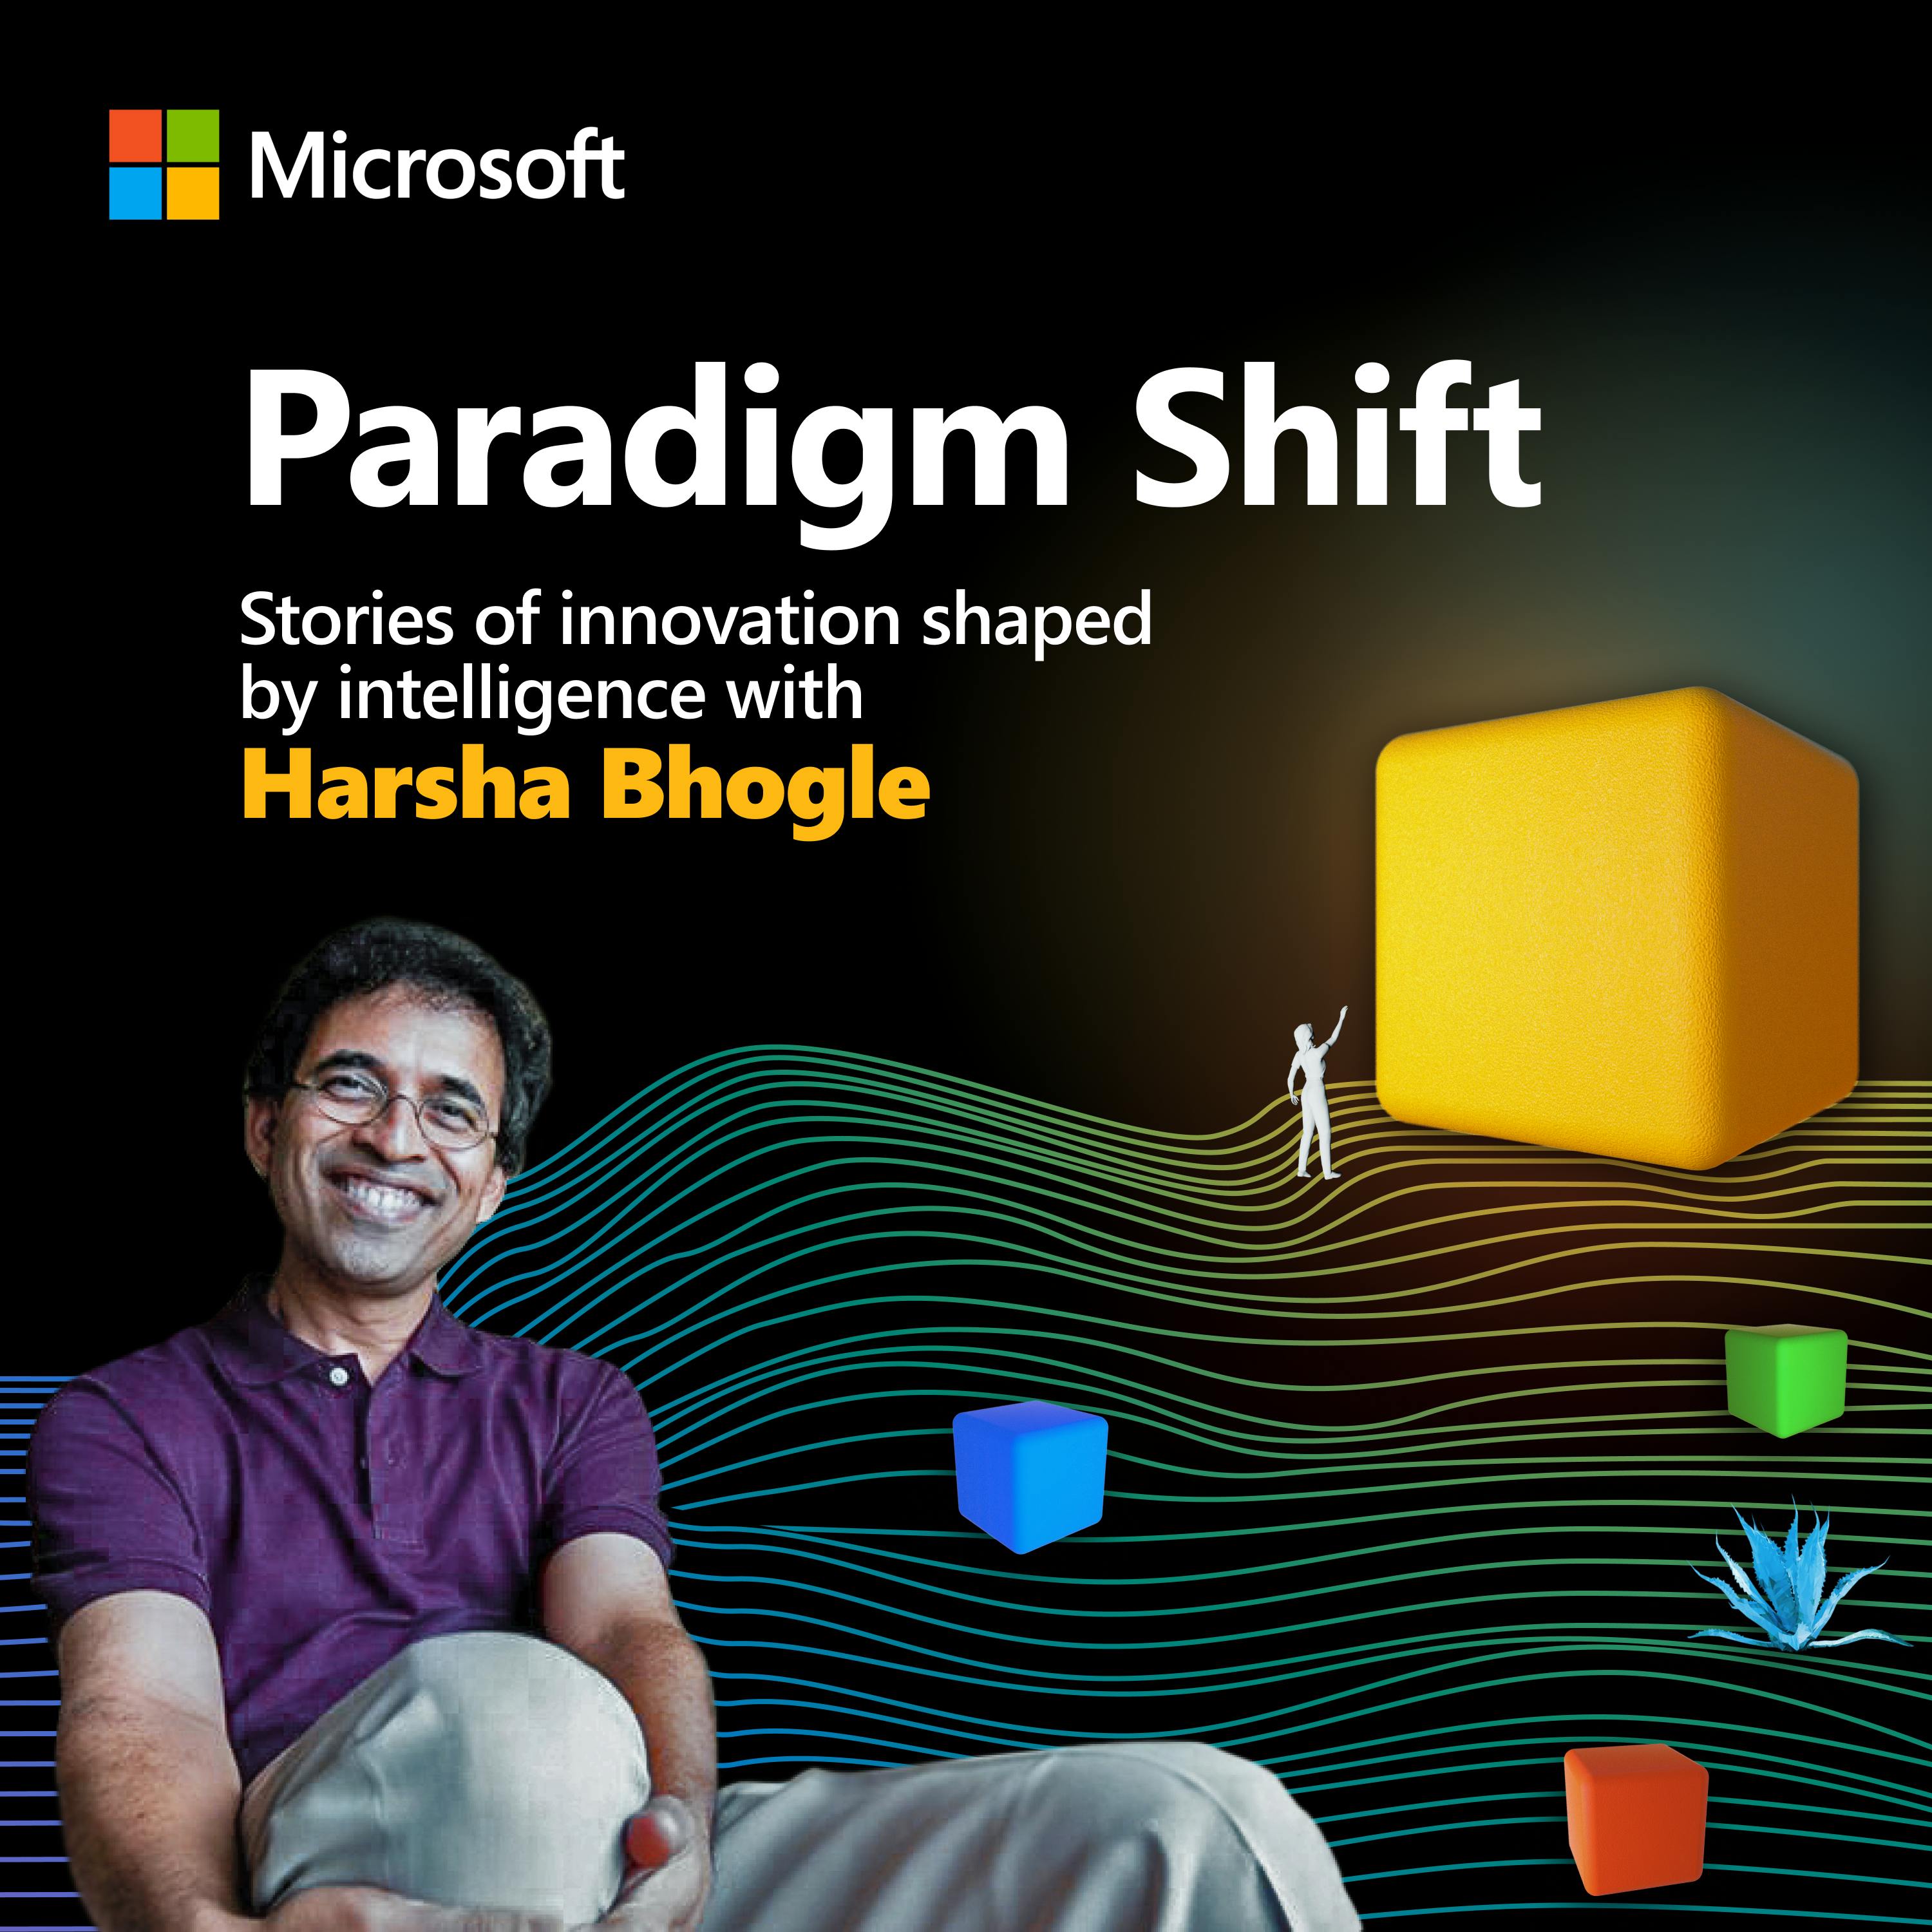 Paradigm Shift - Stories of innovation shaped by intelligence. A Microsoft India podcast in association with ATS Studio.